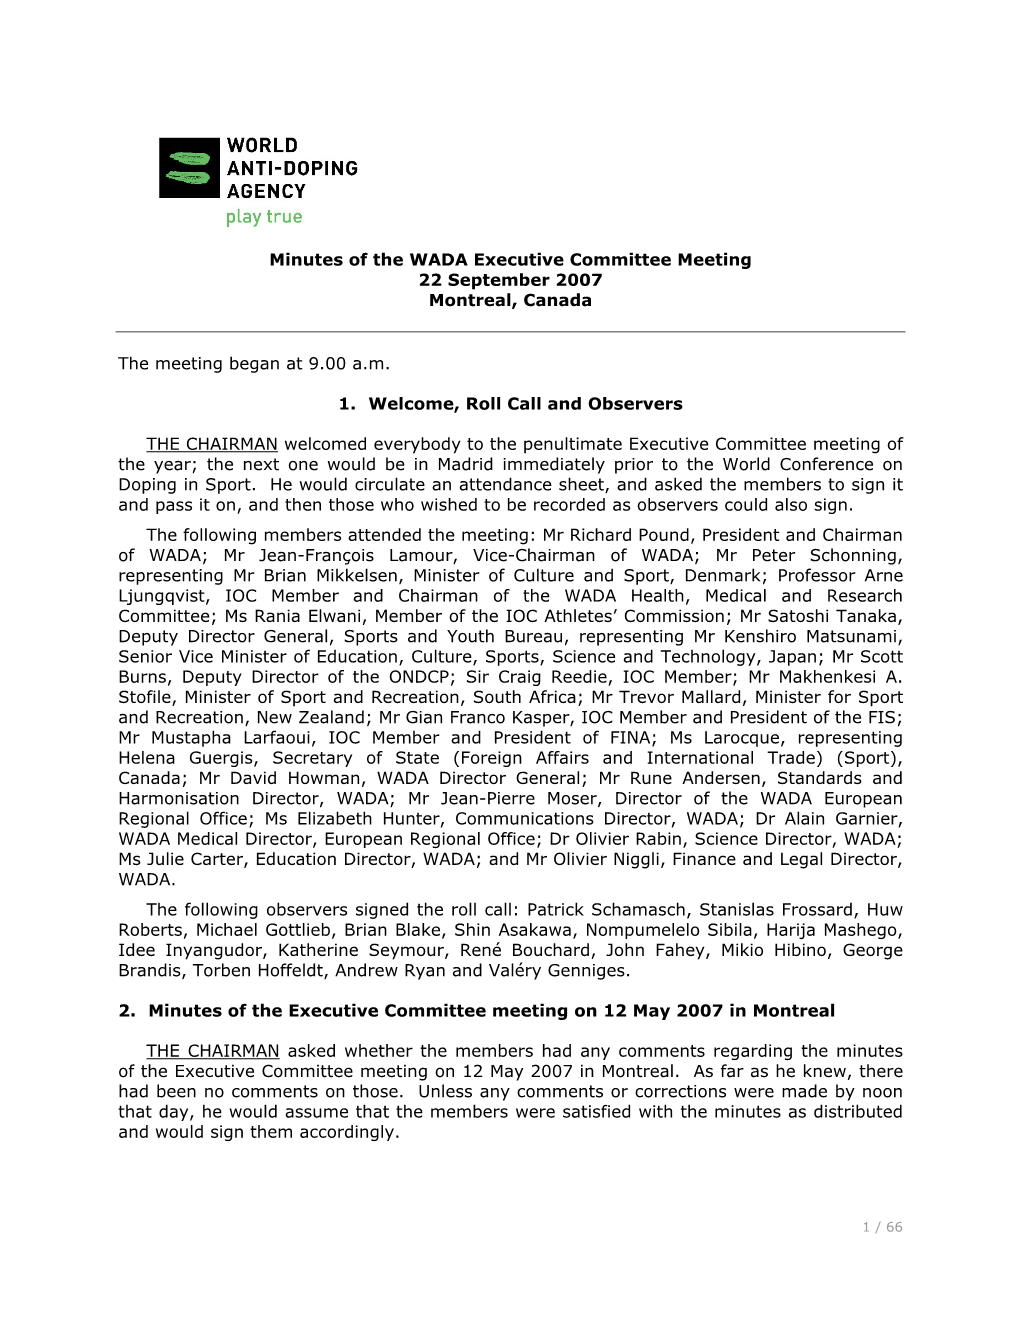 Minutes of the WADA Executive Committee Meeting 22 September 2007 Montreal, Canada